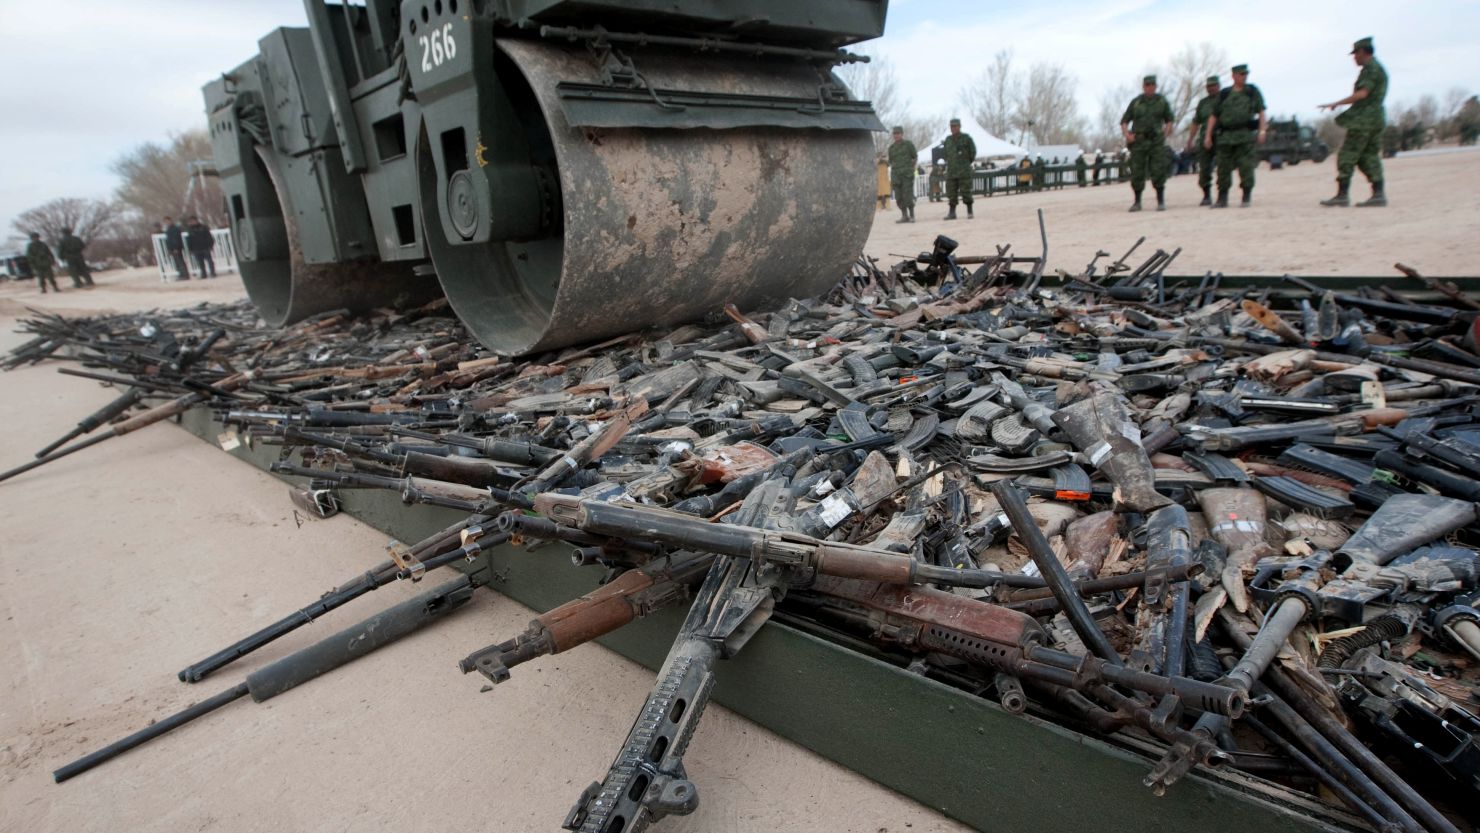 Thousands of confiscated firearms are destroyed last year in the border city of Ciudad Juarez, Mexico.